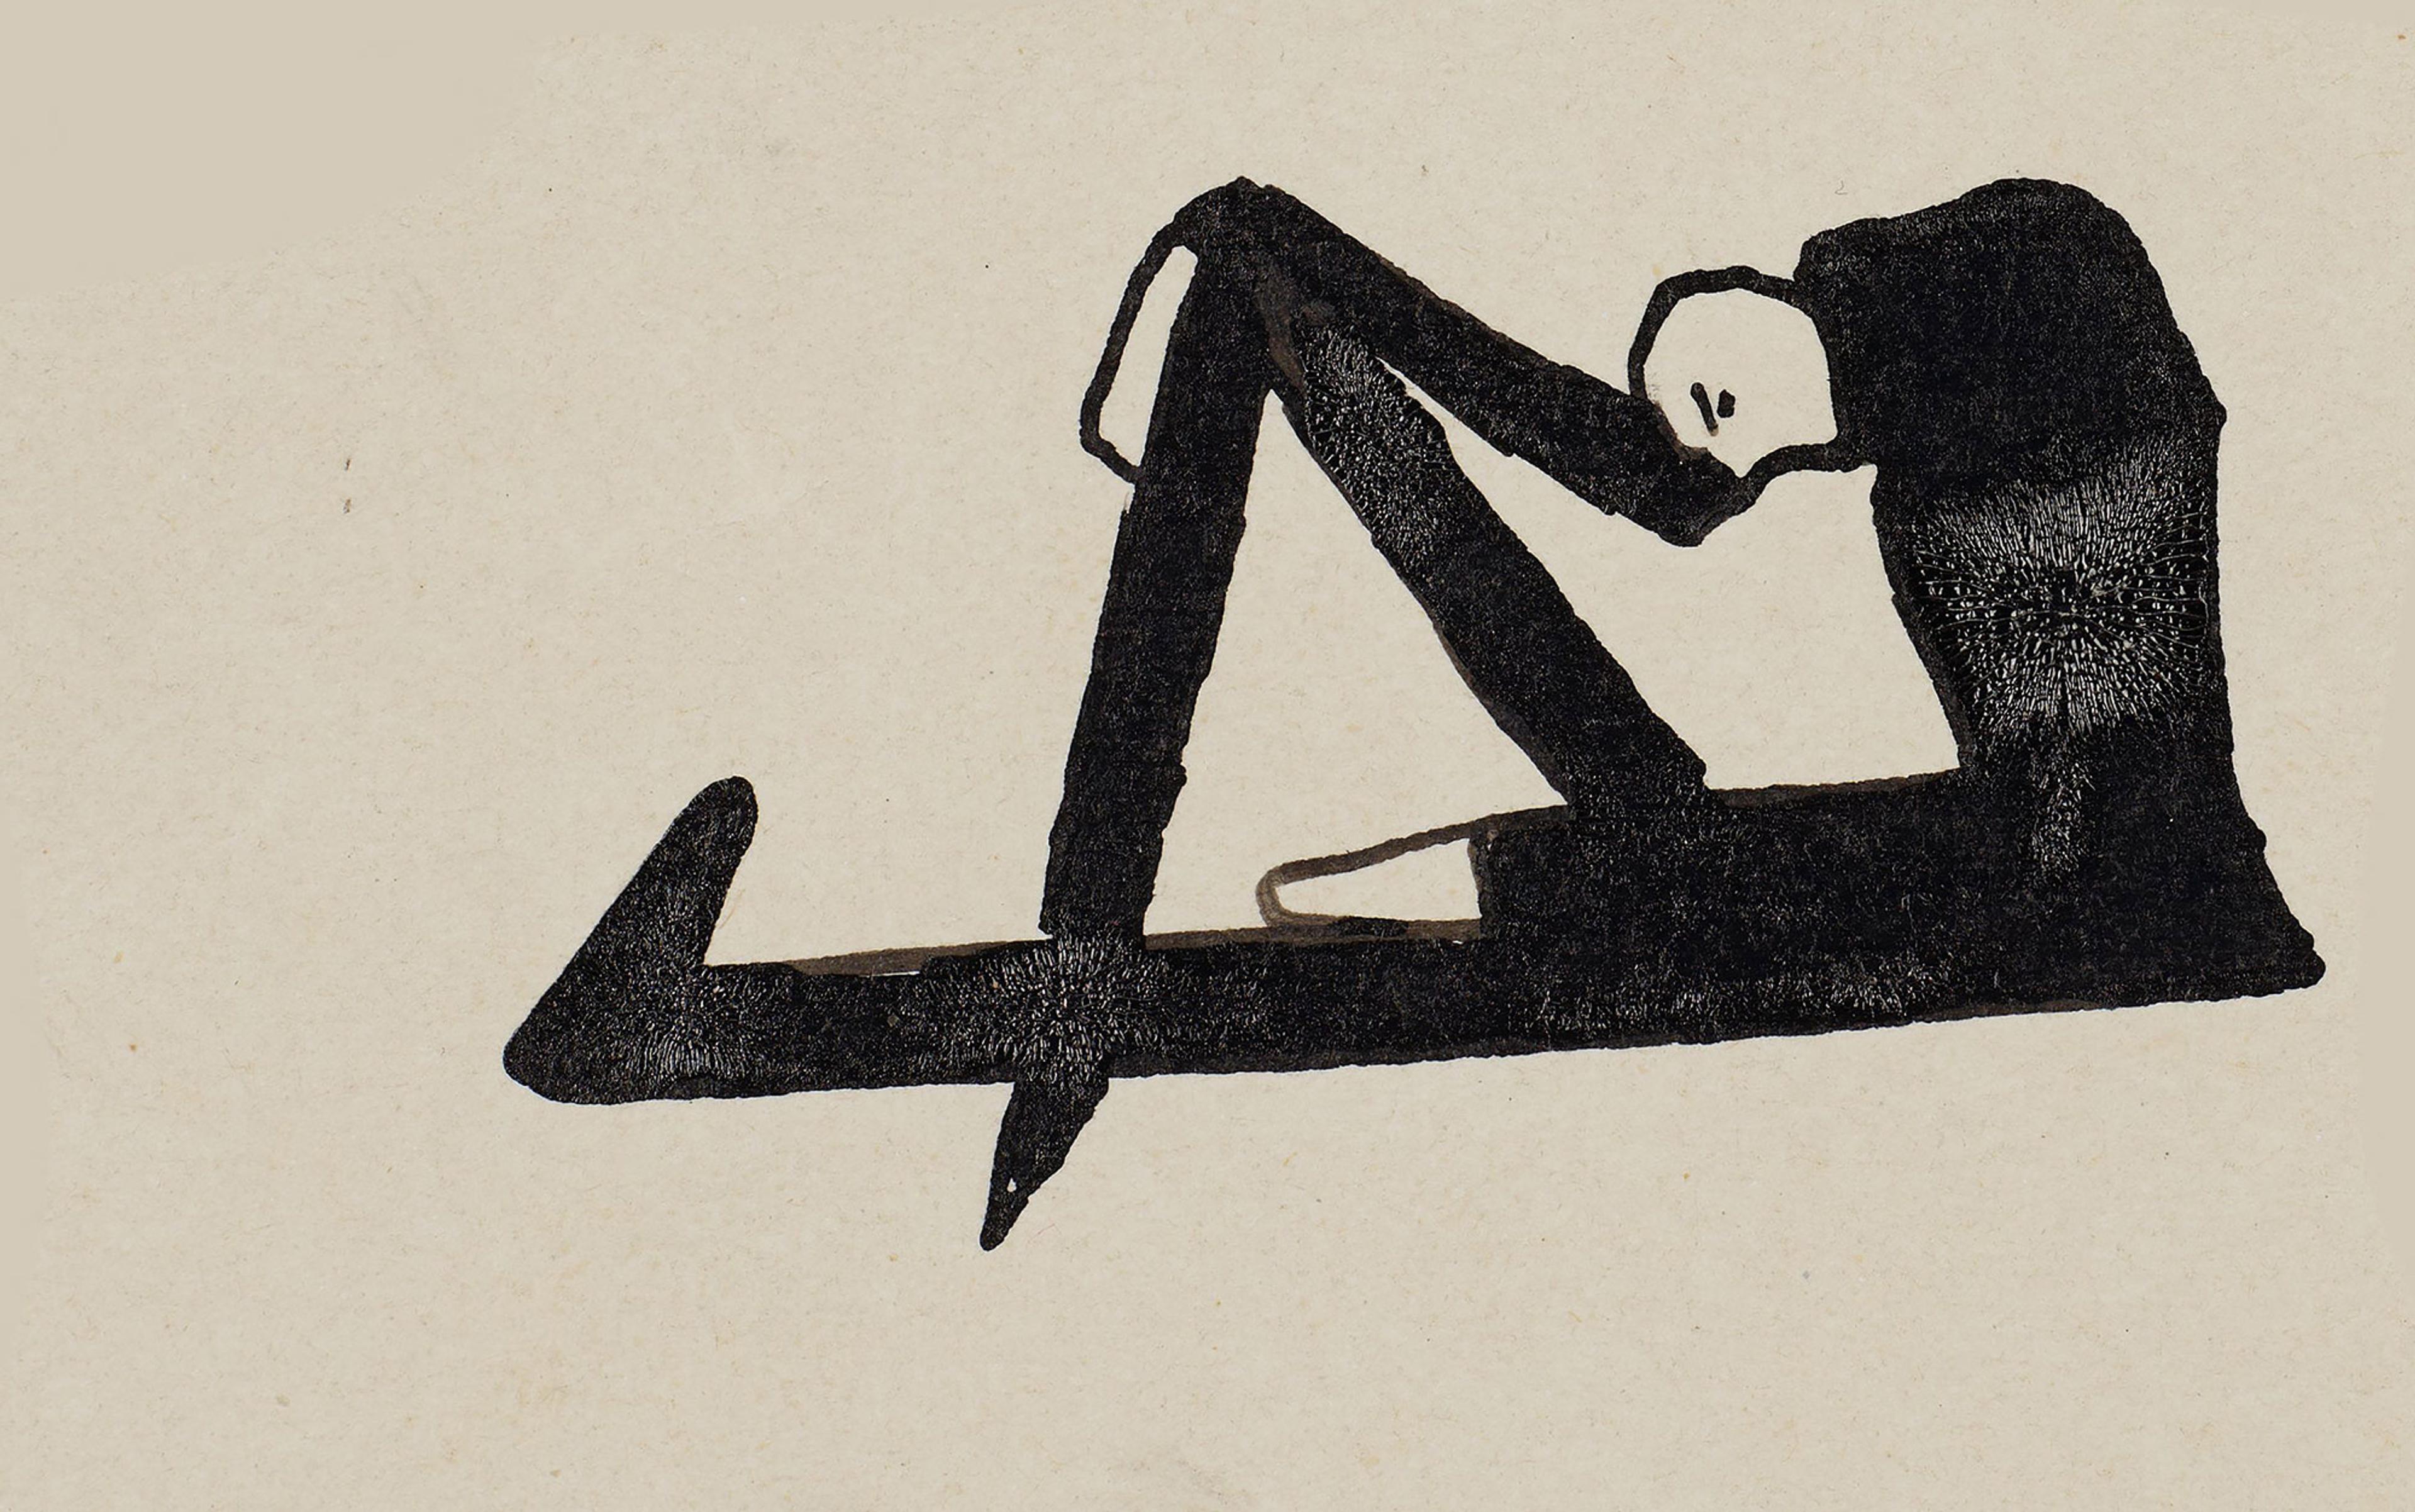 Minimalist drawing of a figure sitting with one leg bent and head resting on hands, rendered in black ink on a beige background.